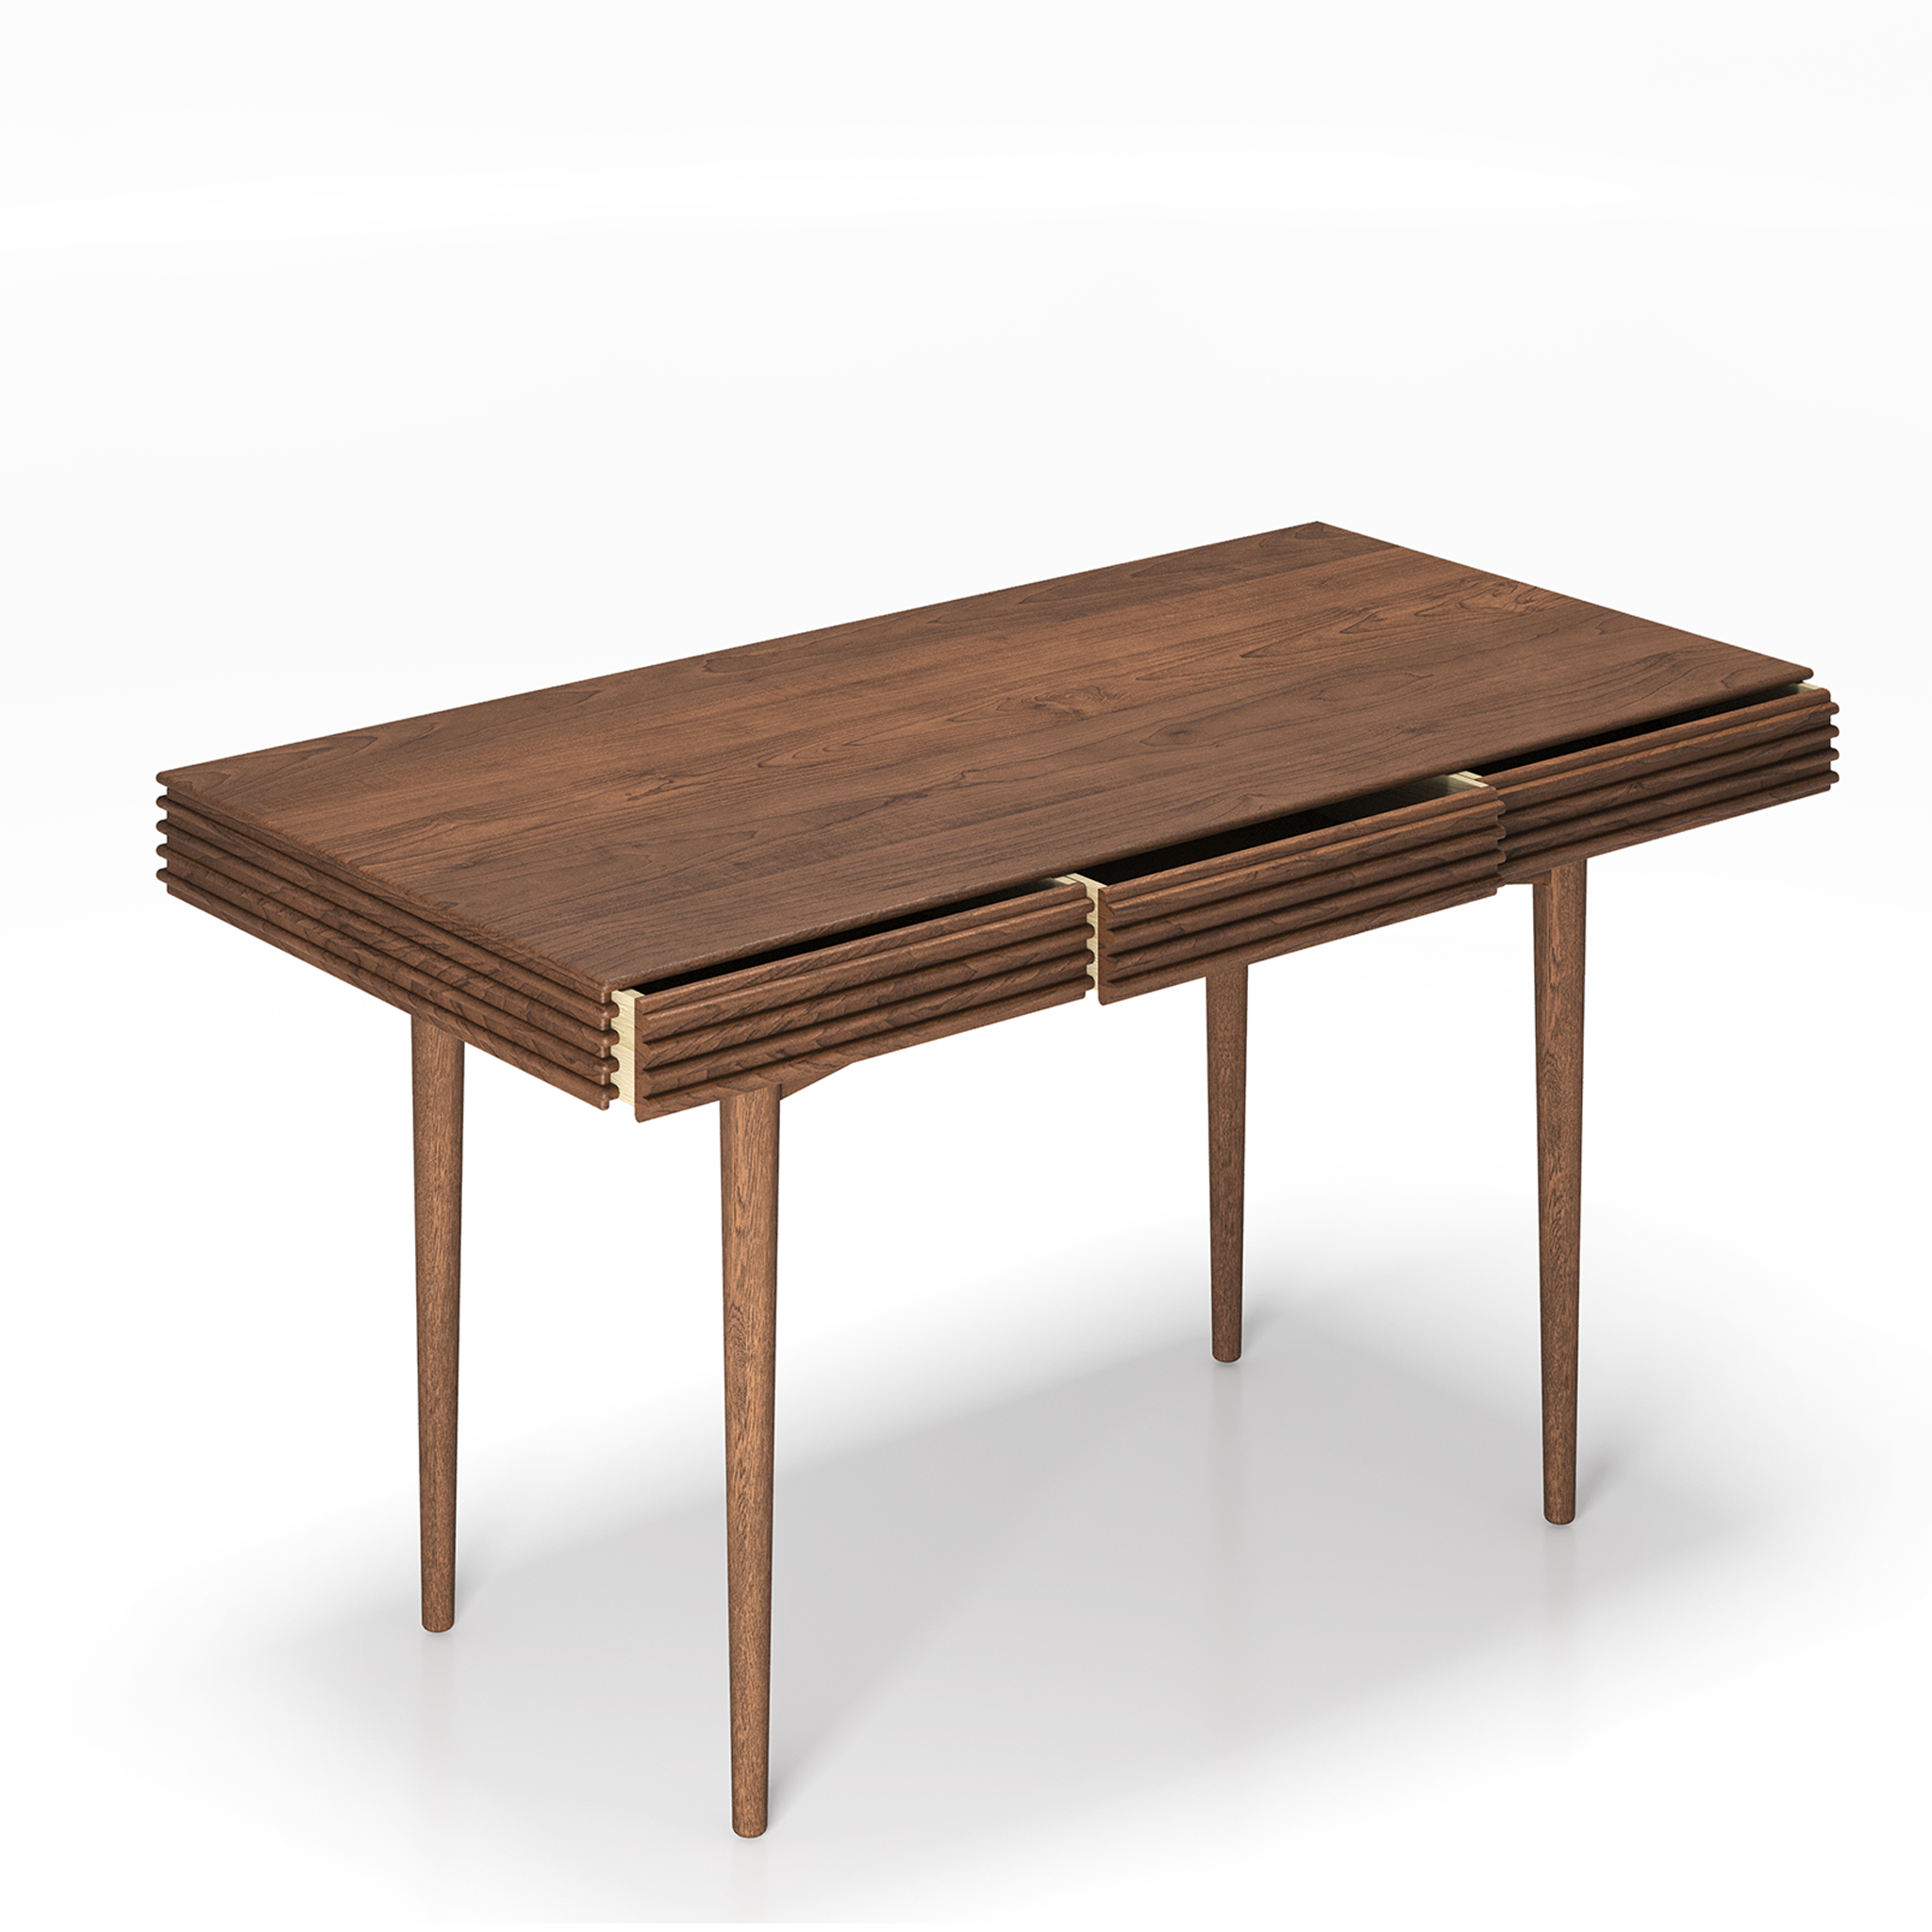 Groove Desk by Christian Troels for DK3